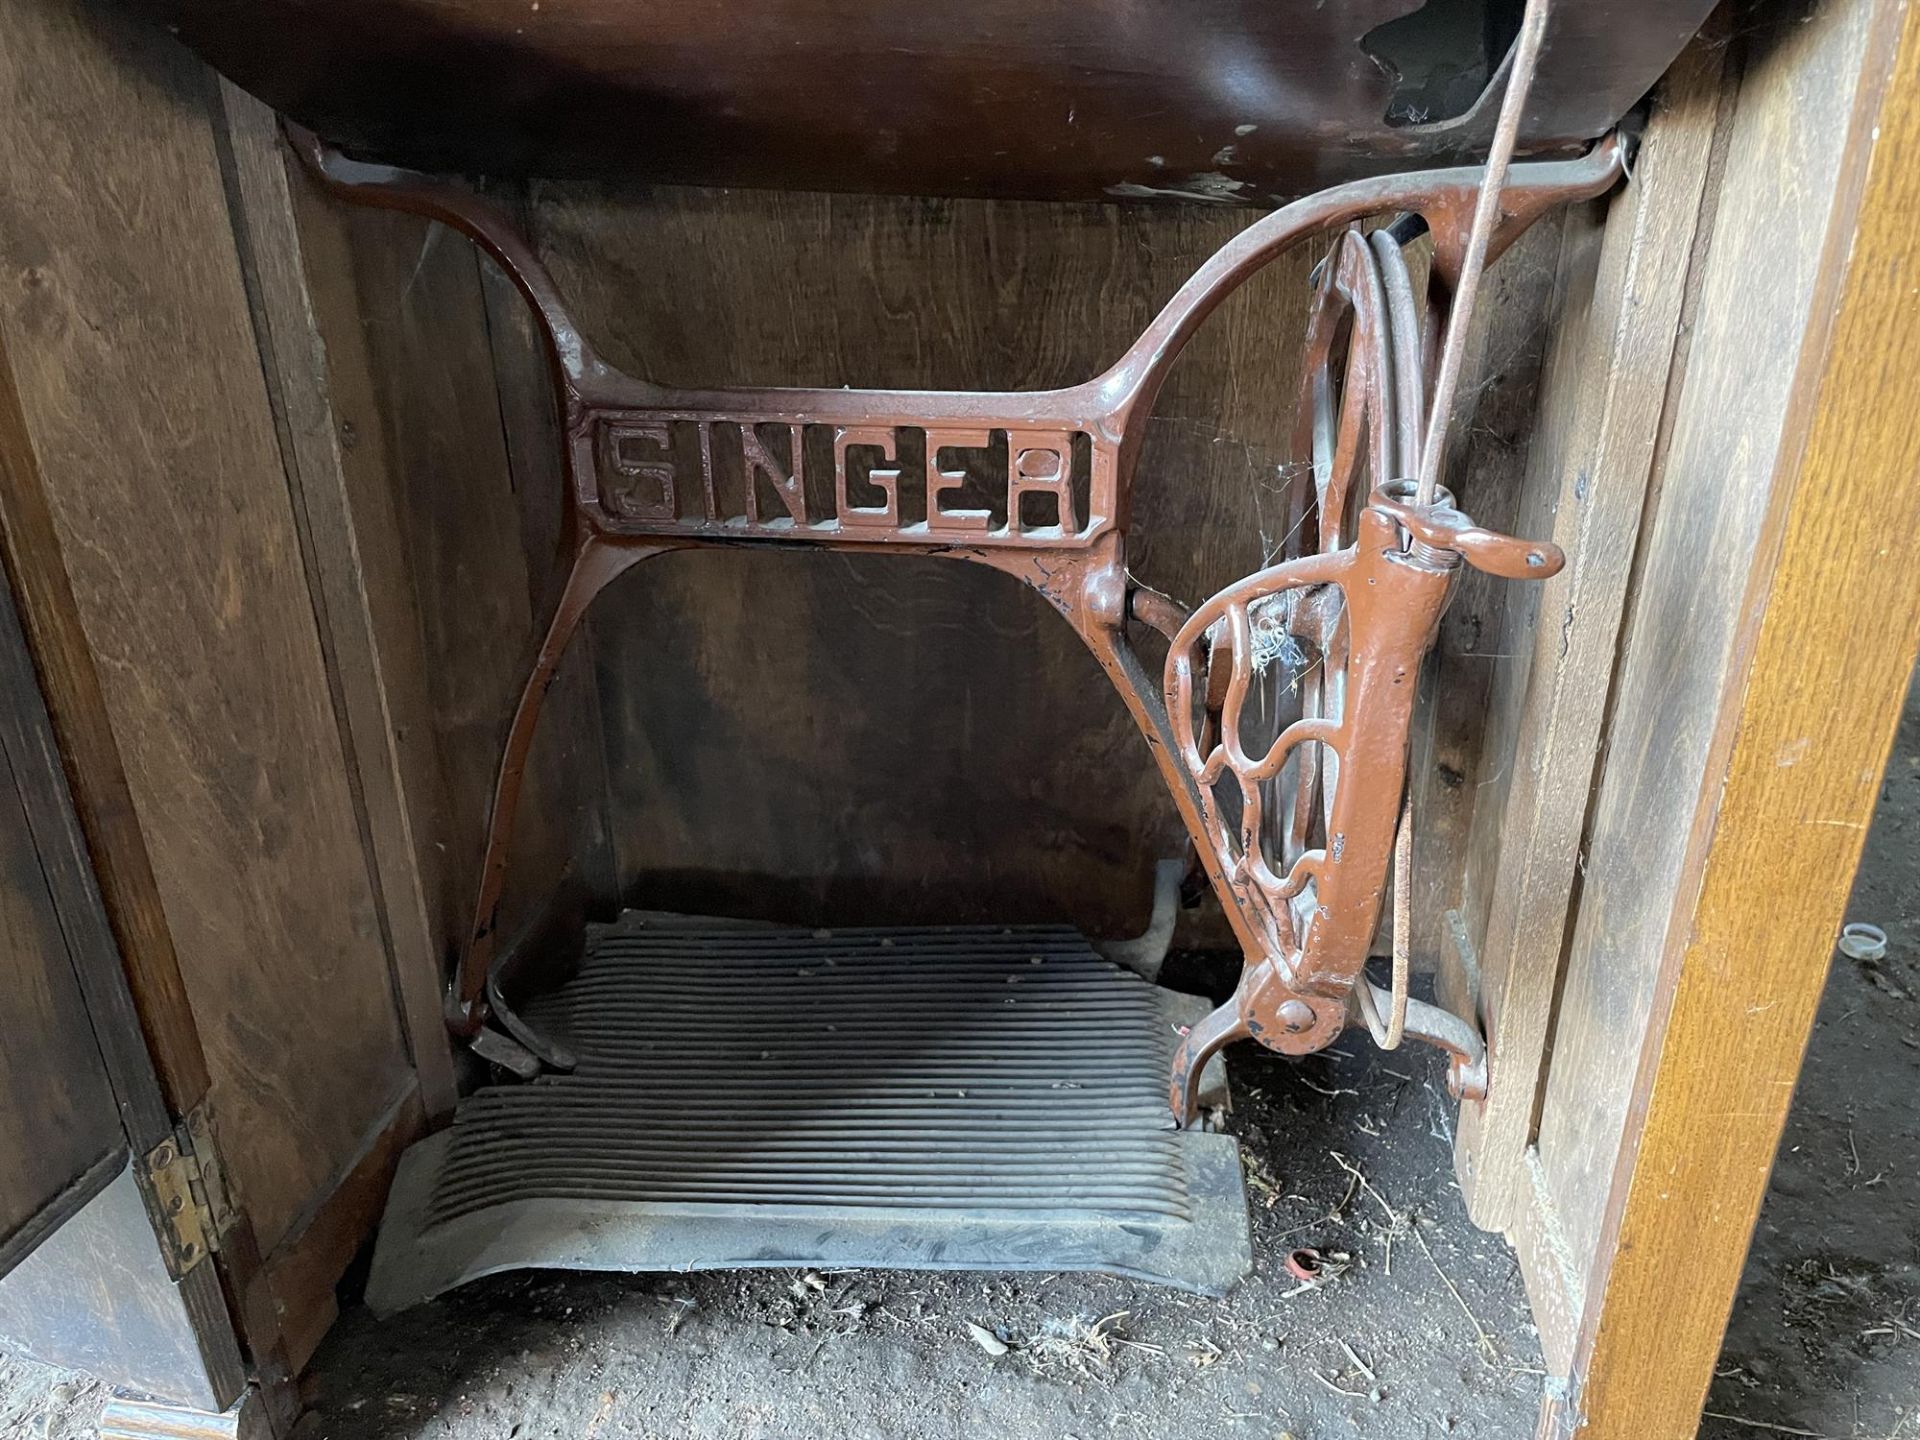 Singer Sewing Machine in Cabinet - Image 5 of 6